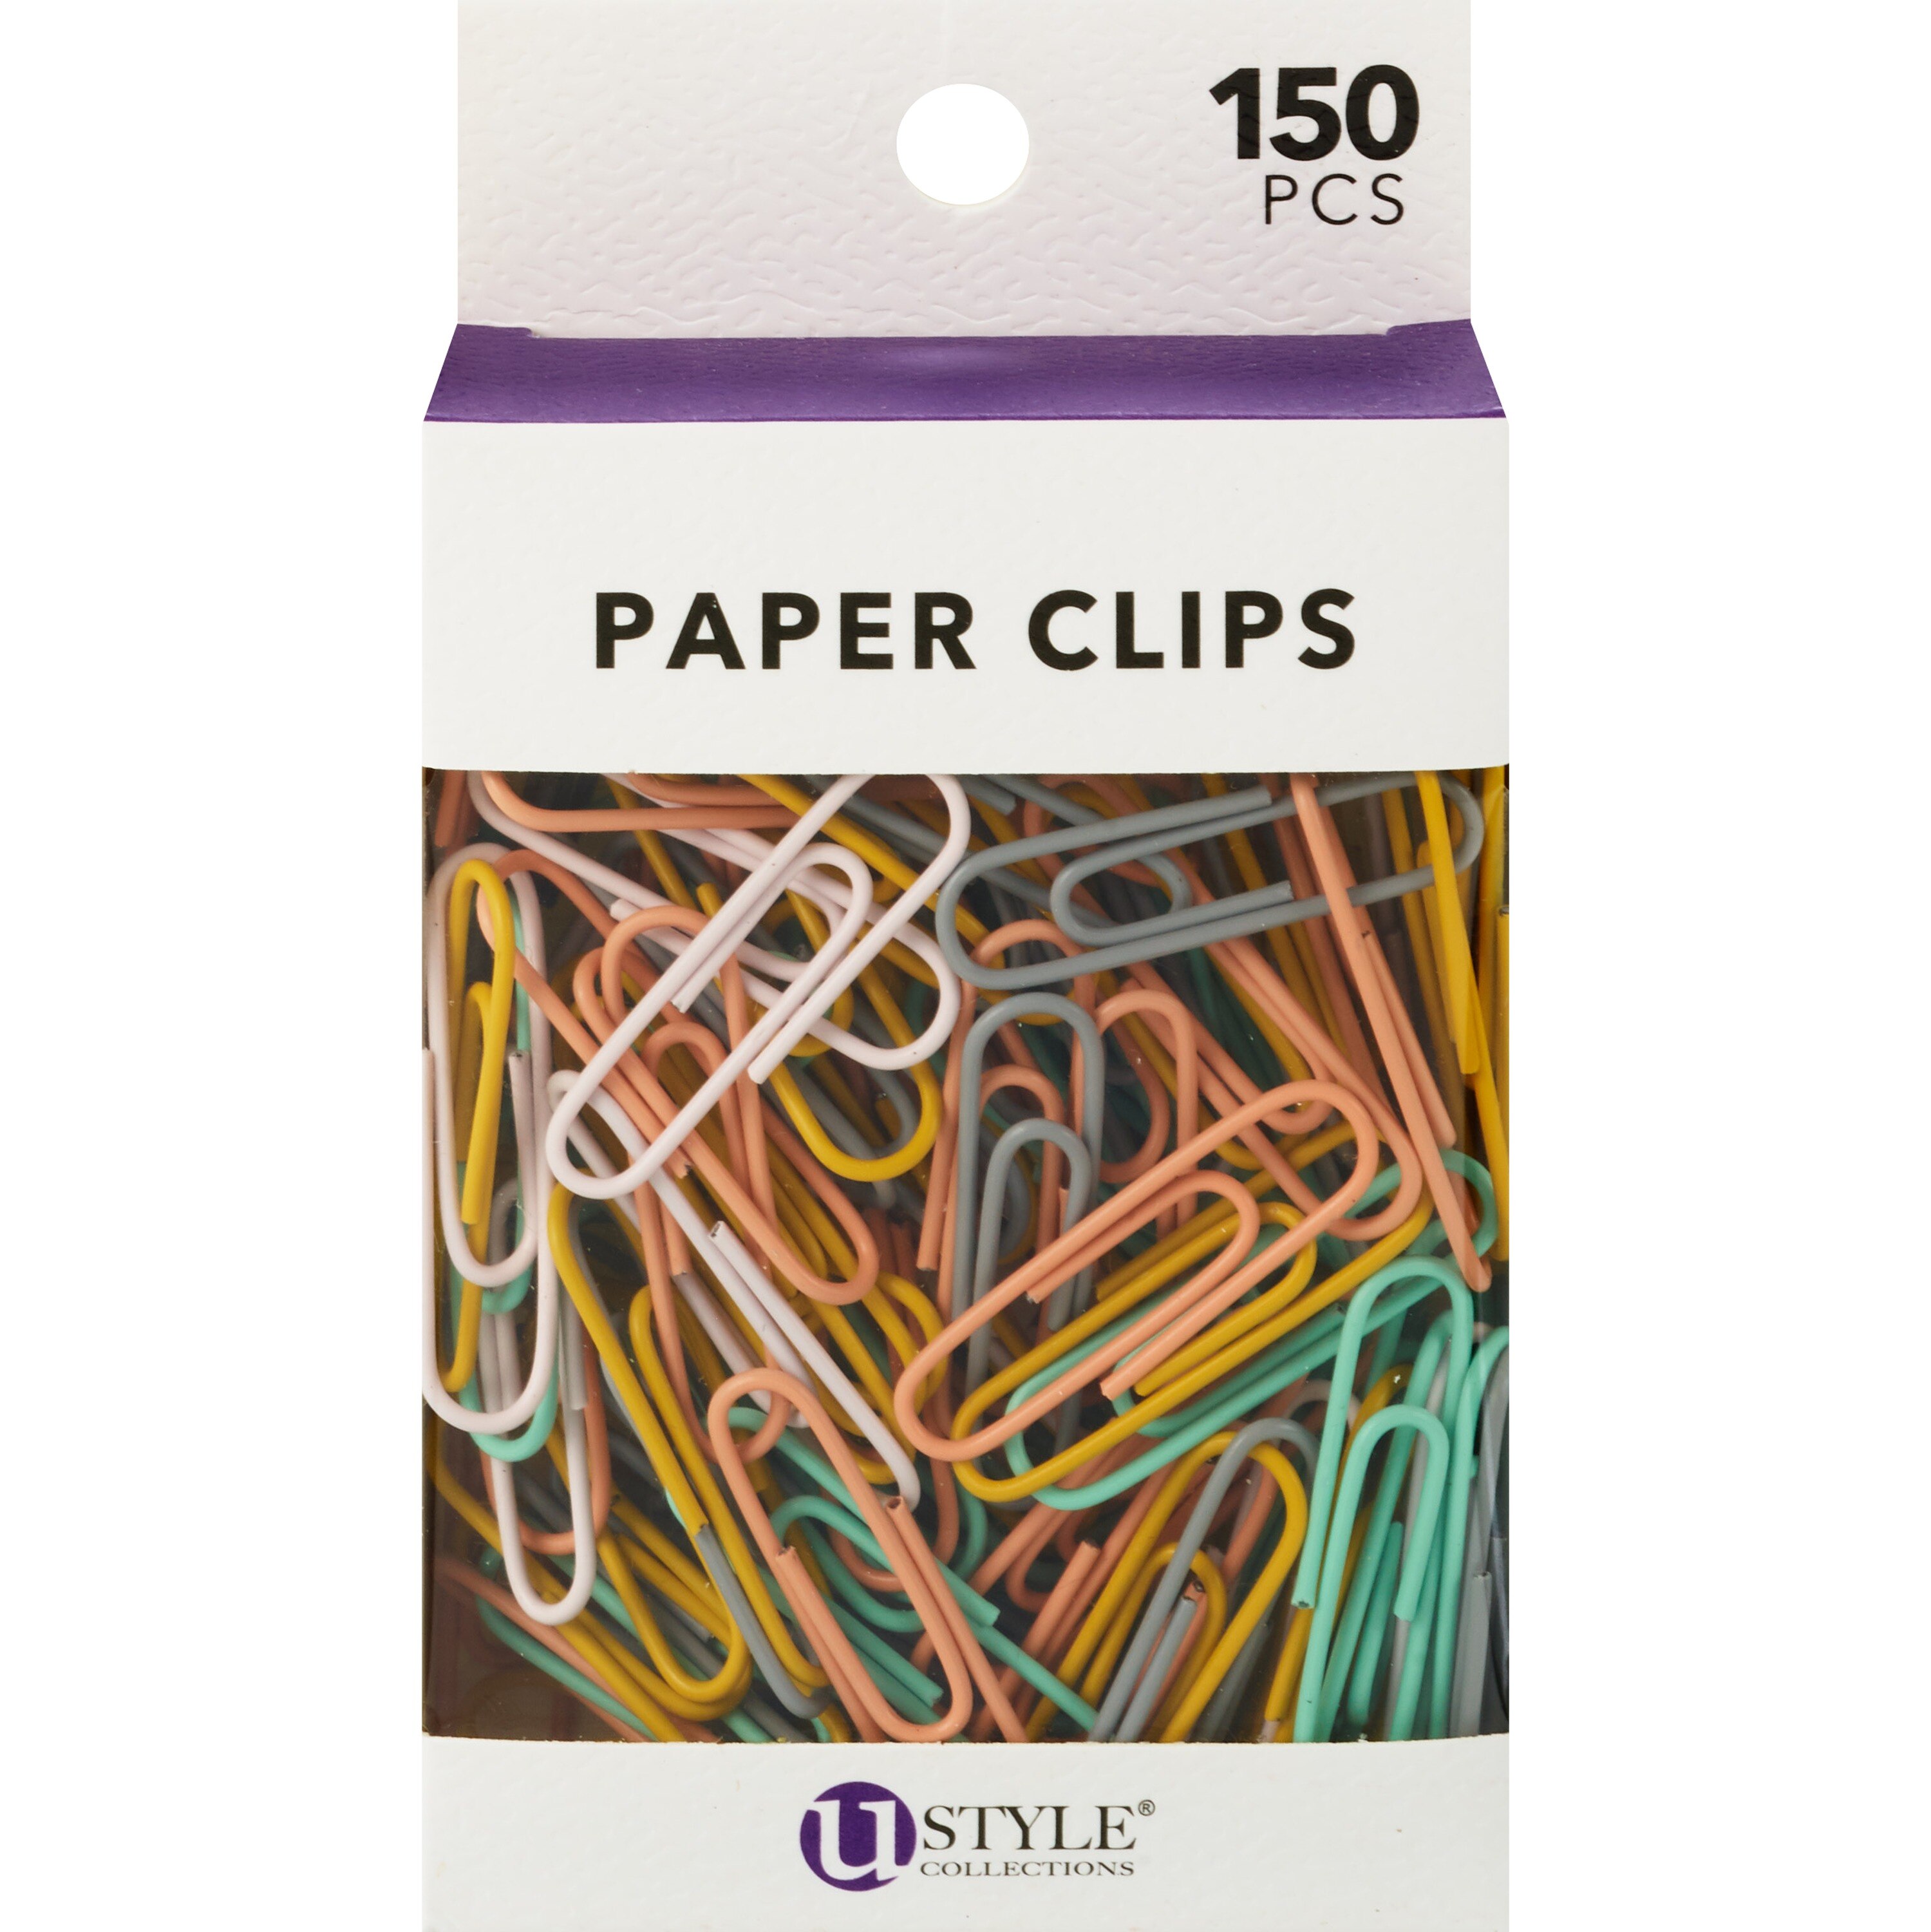 U Style Collections Medium Paper Clips, 150 CT